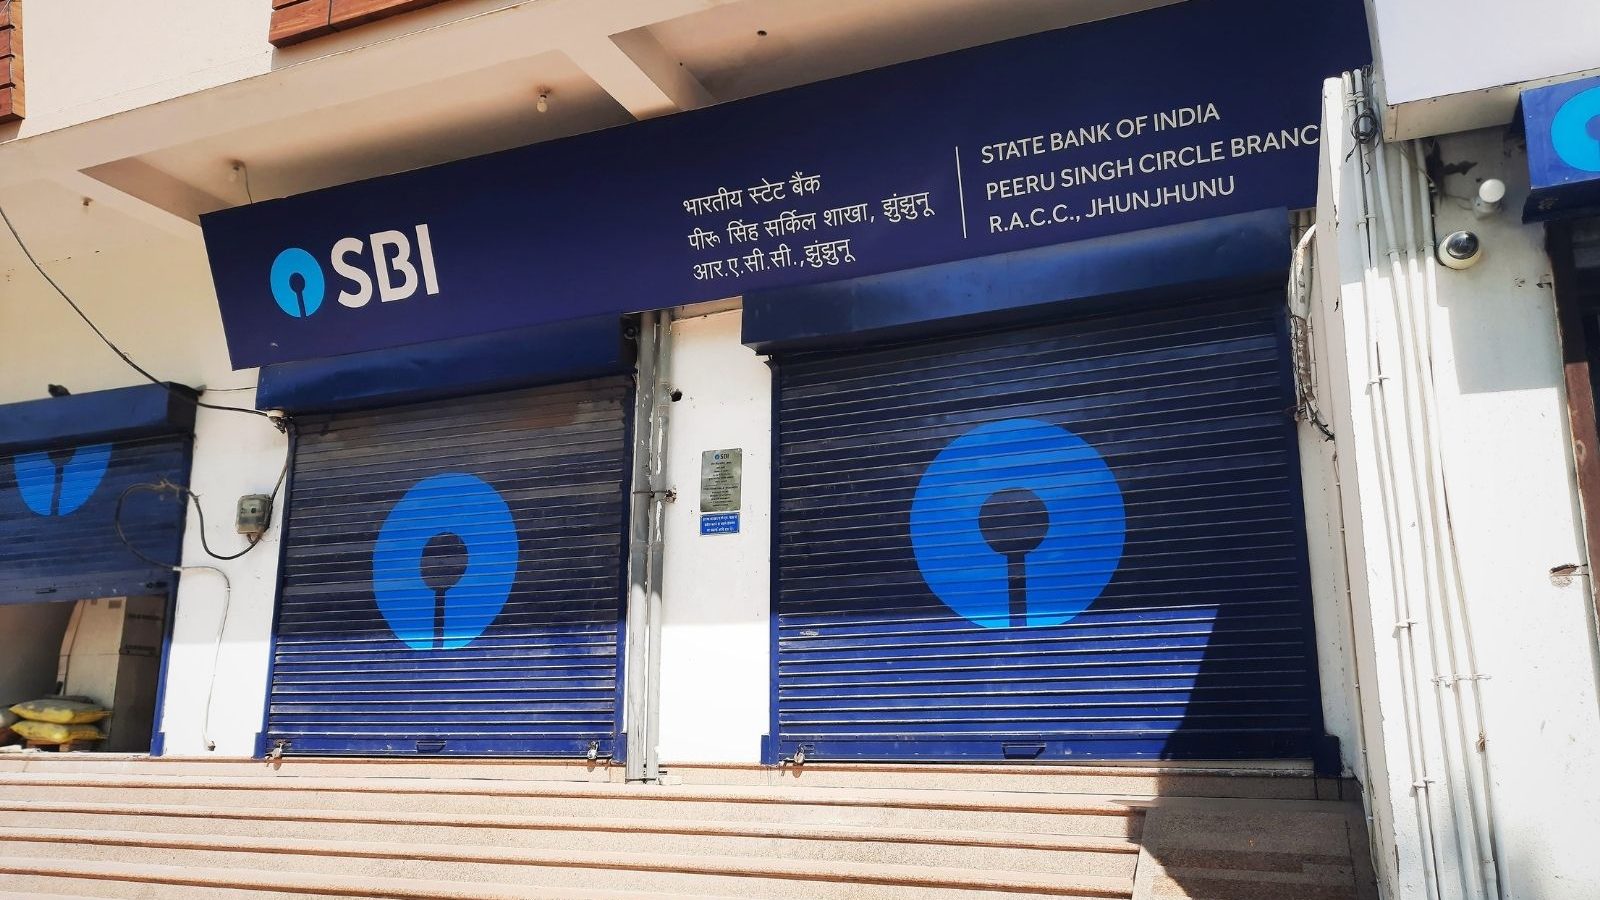 SBI Is Warning Users Against Online Scams From These Numbers